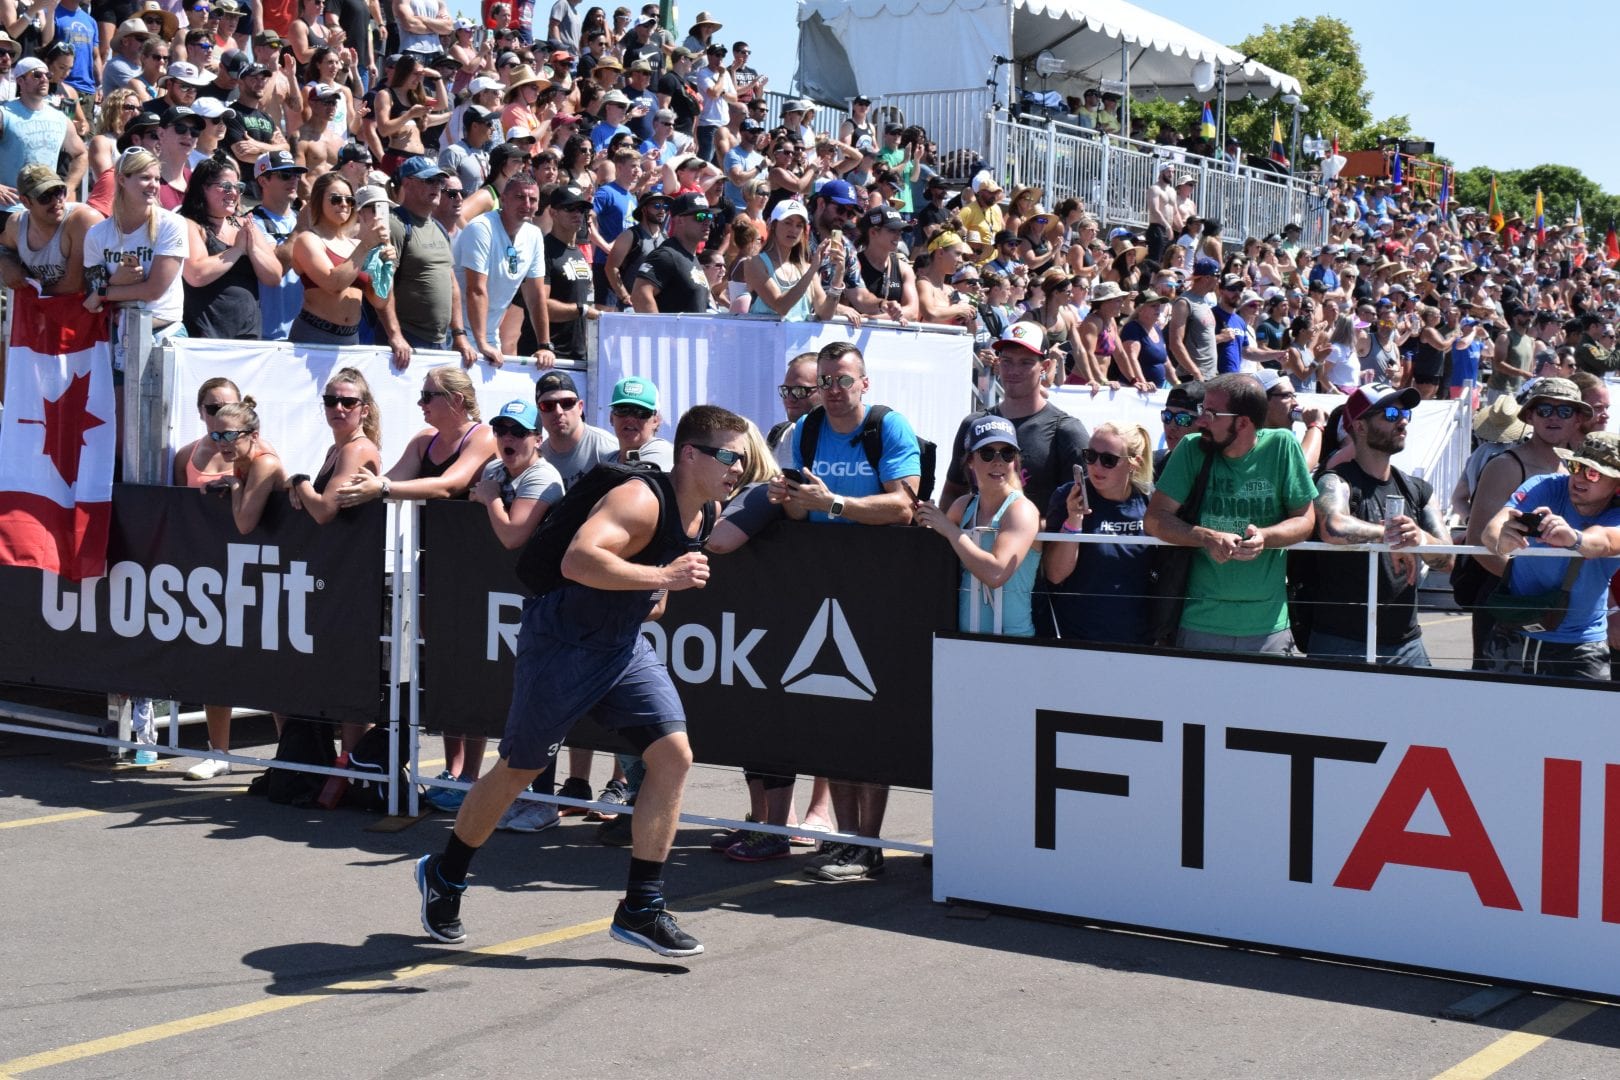 Saxon Panchik completes the Ruck Run event at the 2019 CrossFit Games.